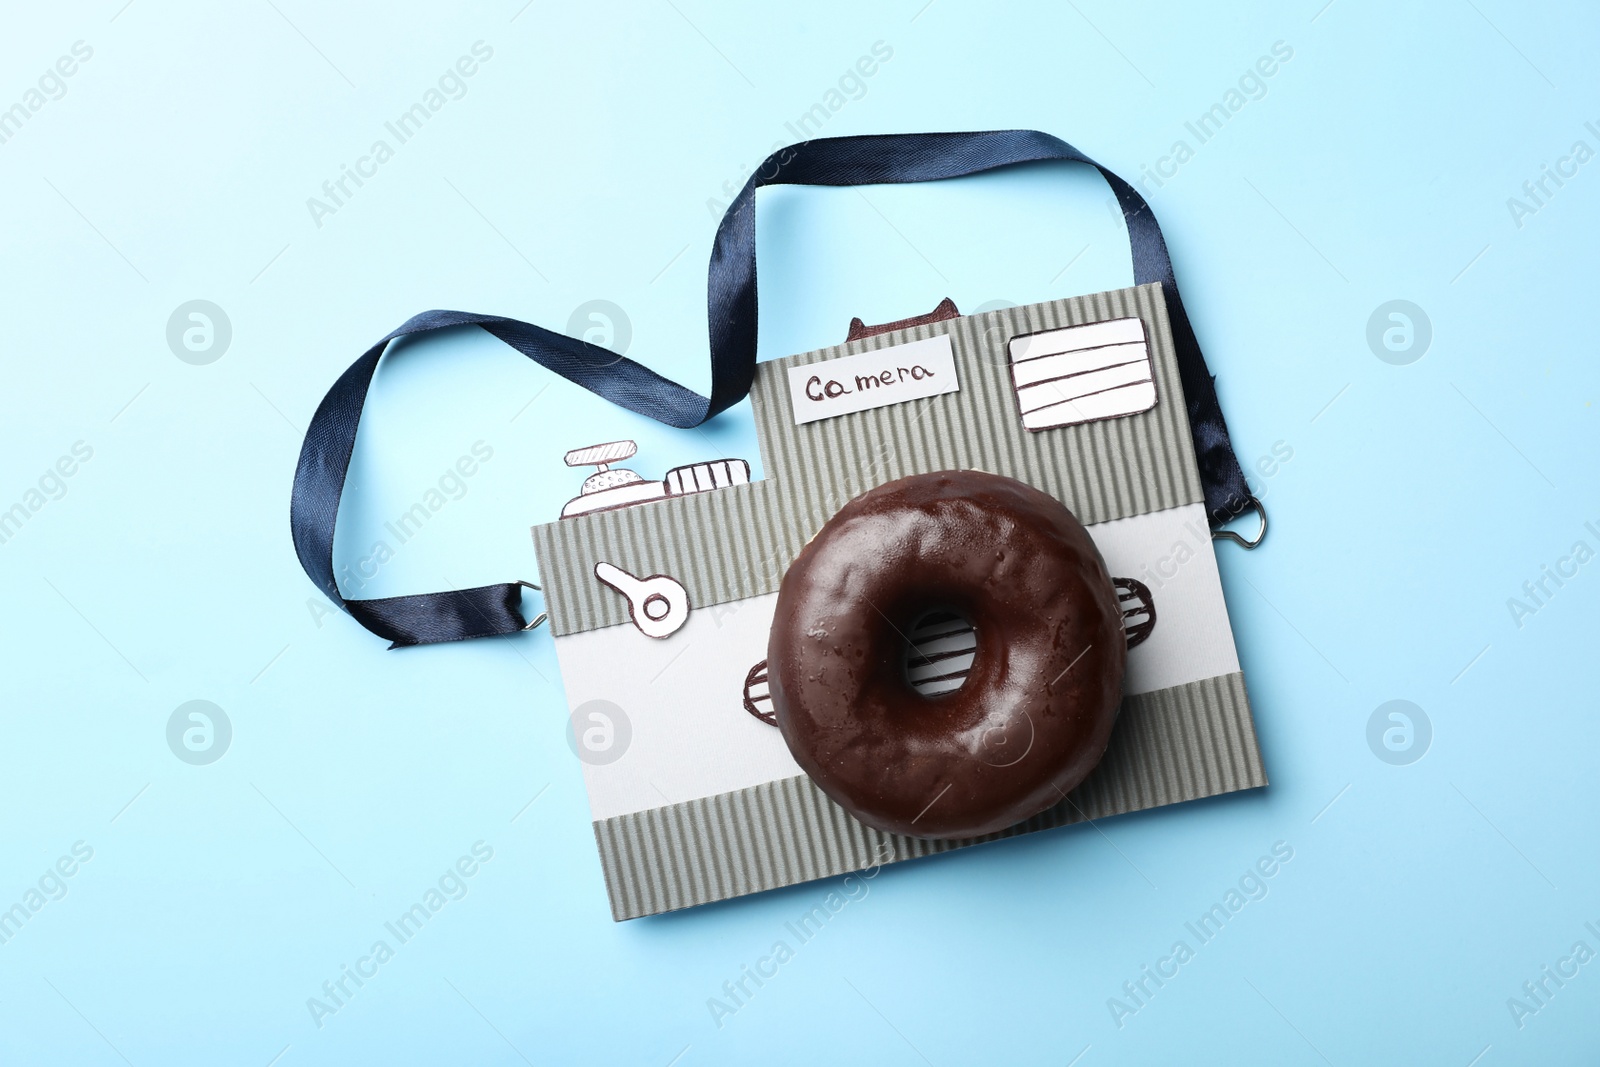 Photo of Camera made from donut and piece of cardboard on light blue background, top view